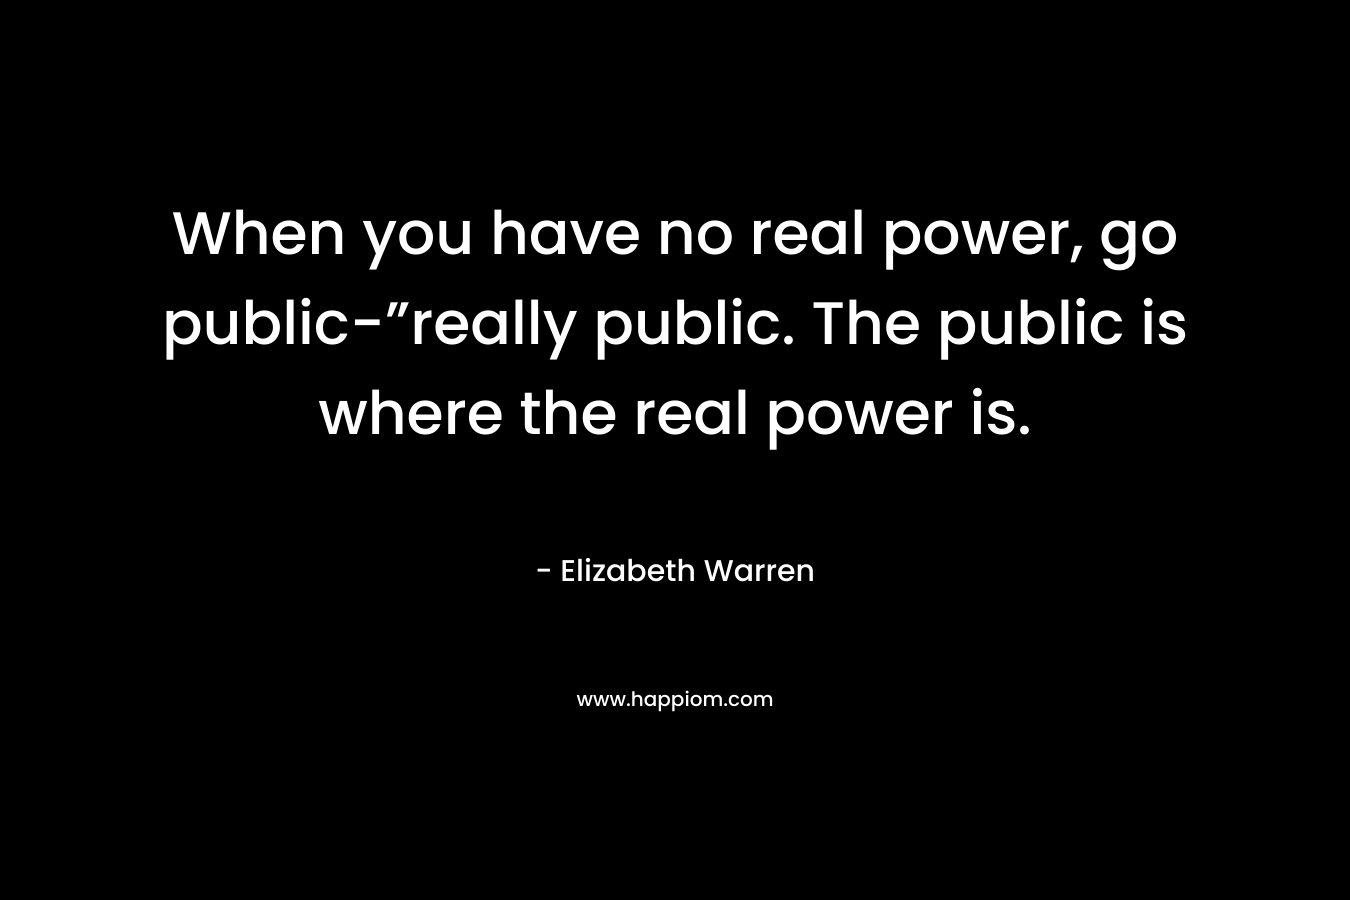 When you have no real power, go public-”really public. The public is where the real power is. – Elizabeth Warren